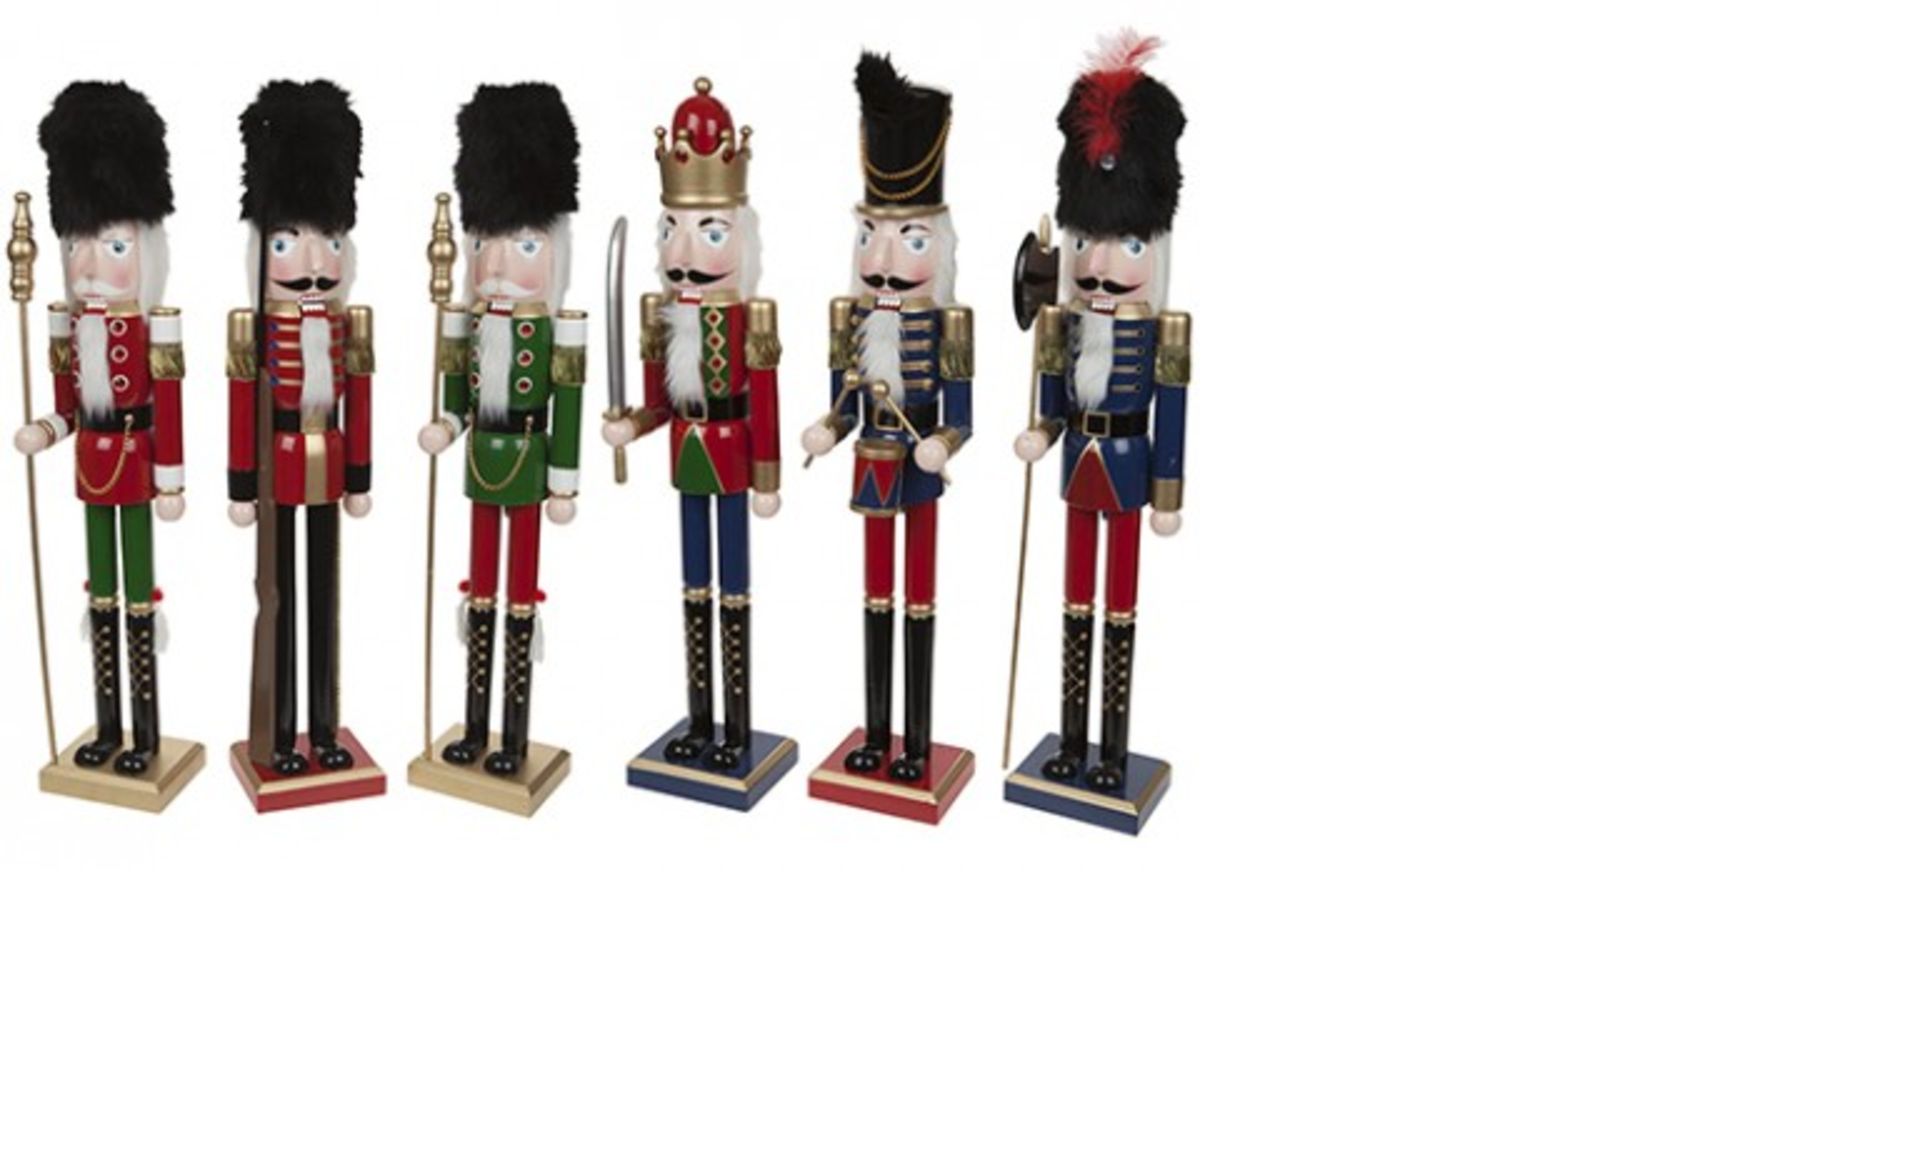 V *TRADE QTY* Brand New Large wooden hand painted soldier nut-cracker/ornament - 24" tall X 7 YOUR